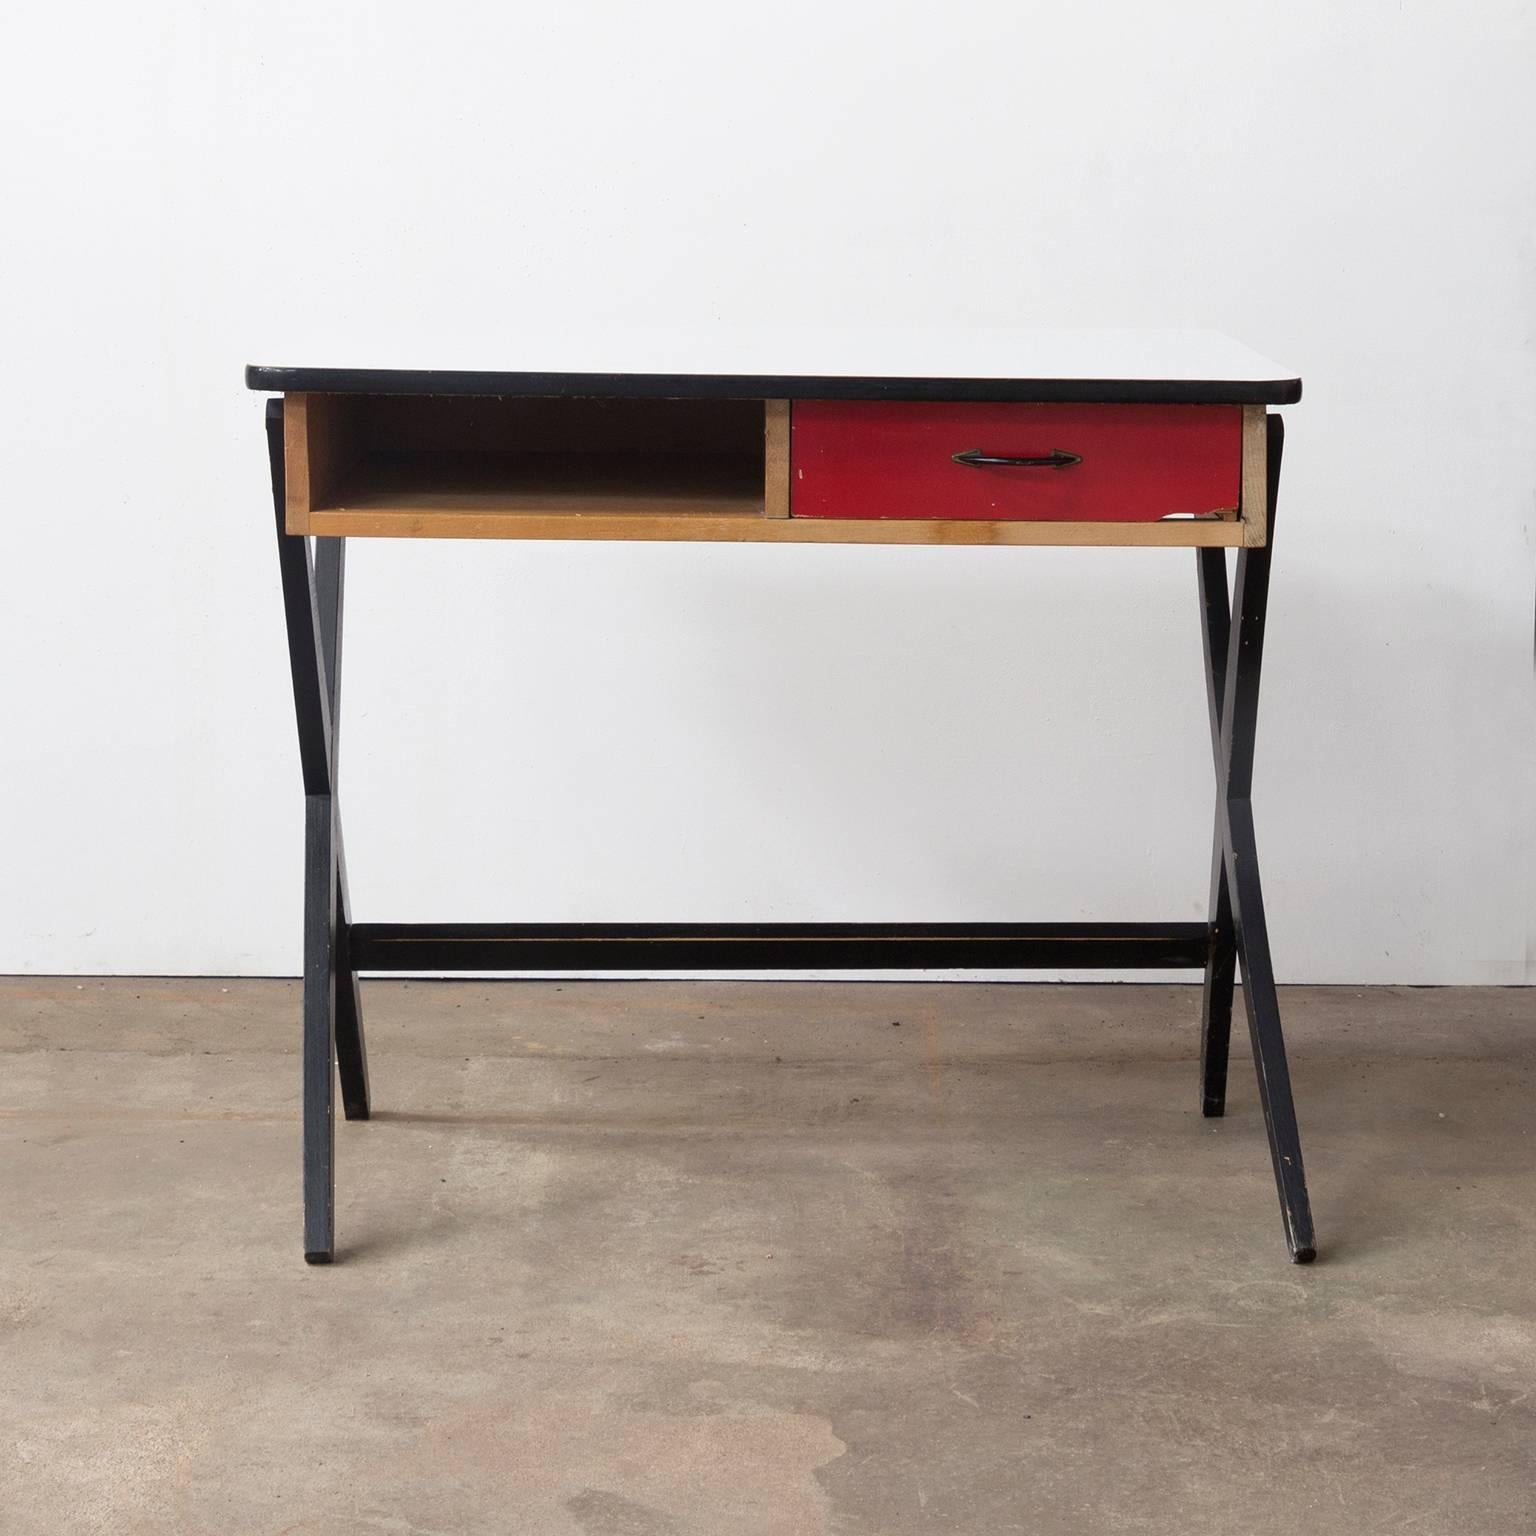 1954, Coen de Vries for Devo Wooden Writing Desk with Red Drawer and Formica Top In Good Condition For Sale In Amsterdam IJMuiden, NL